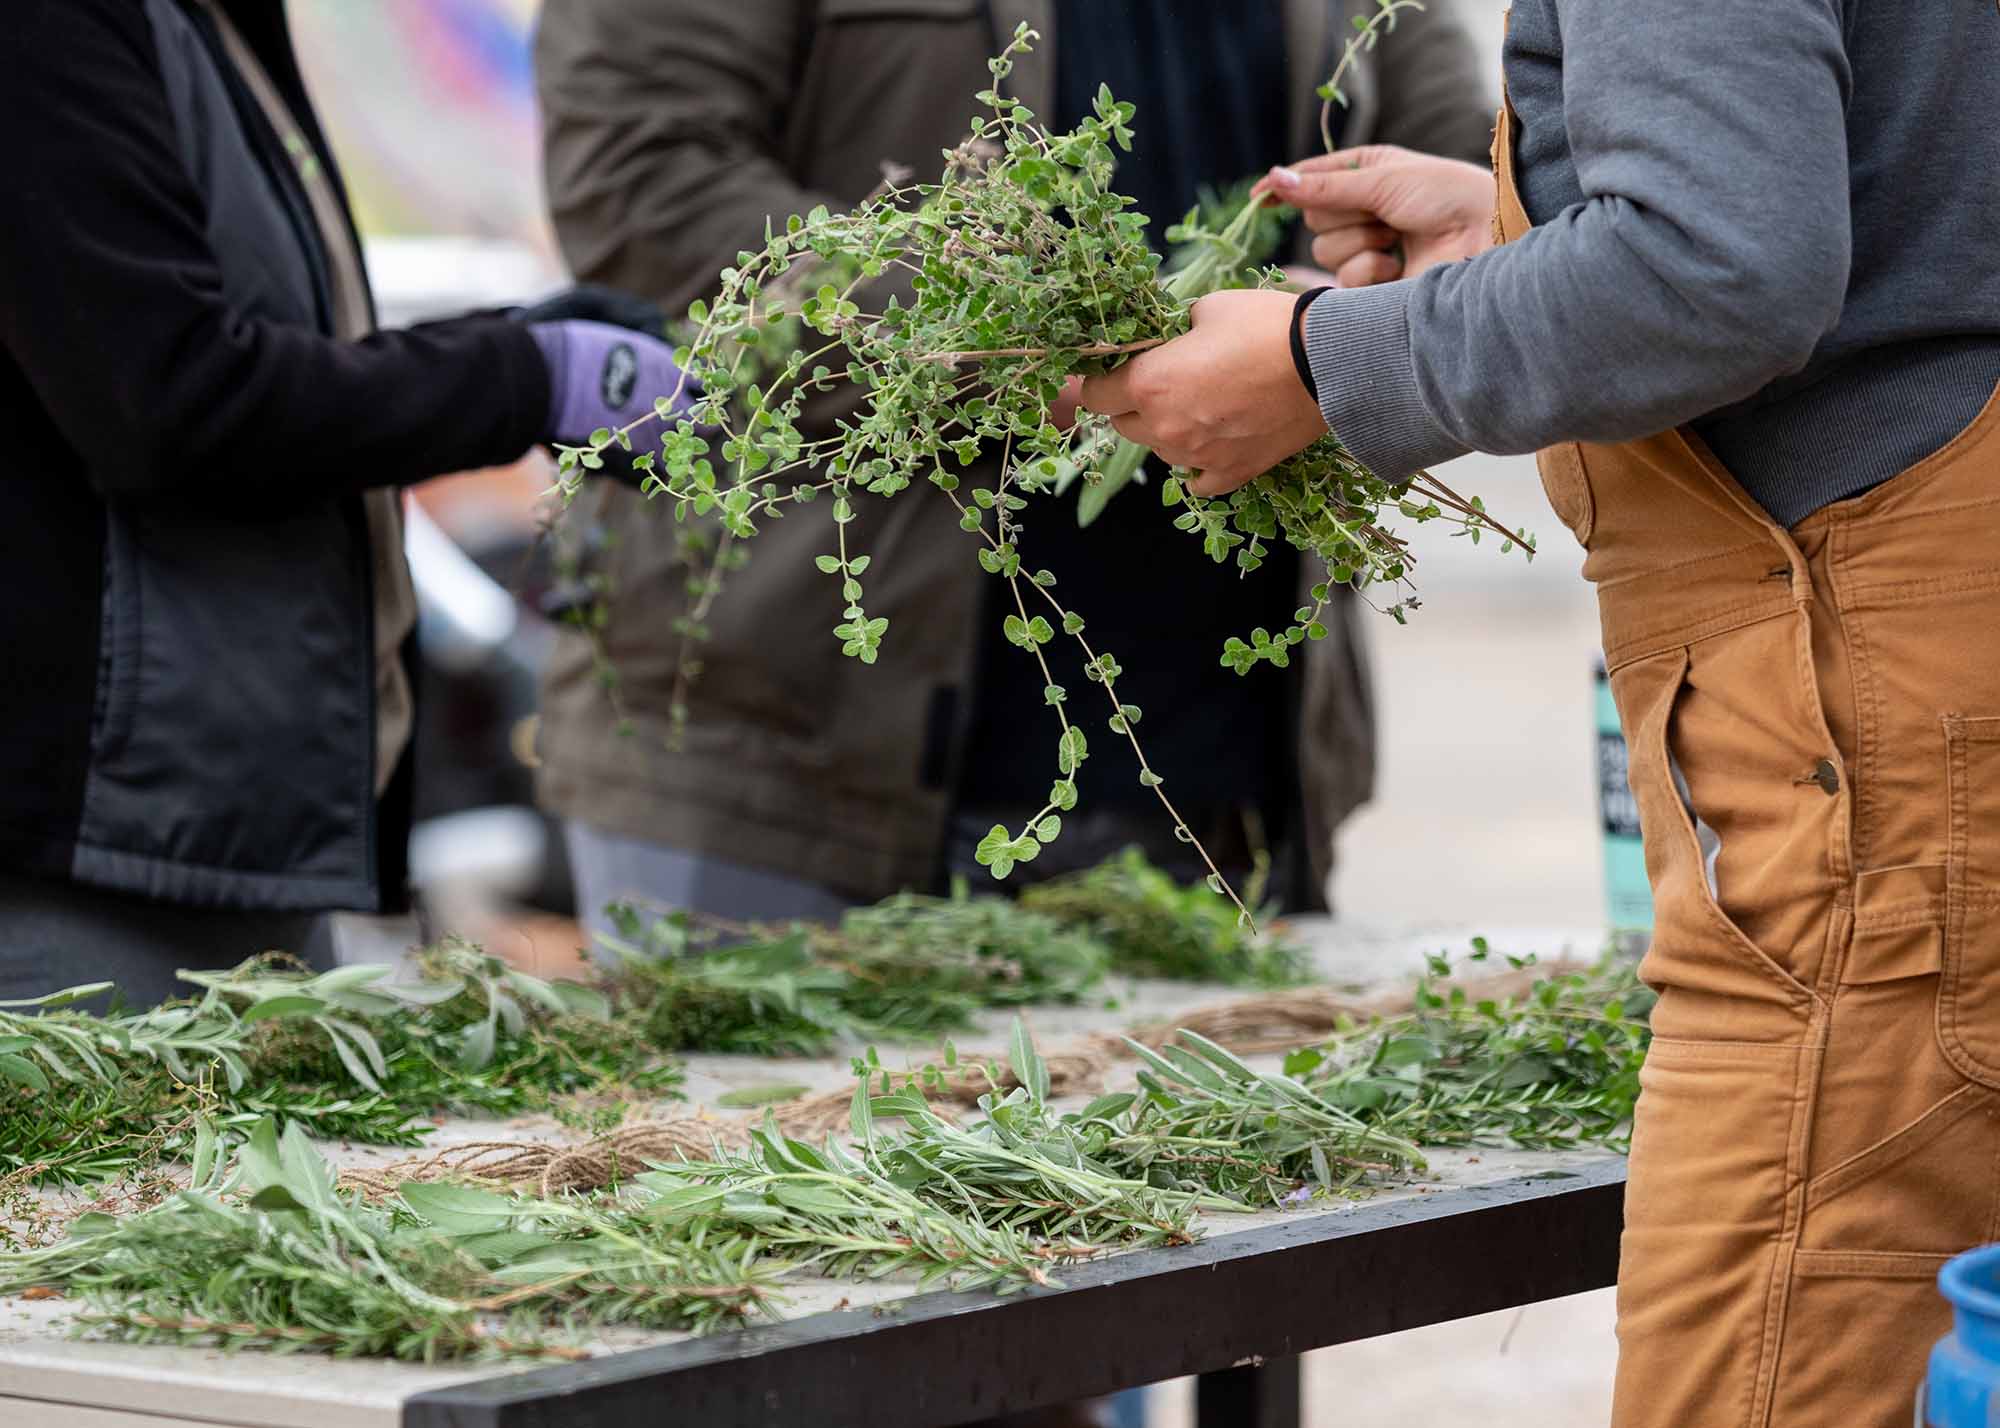 Students wrapping bundles of herbs on a gardening table